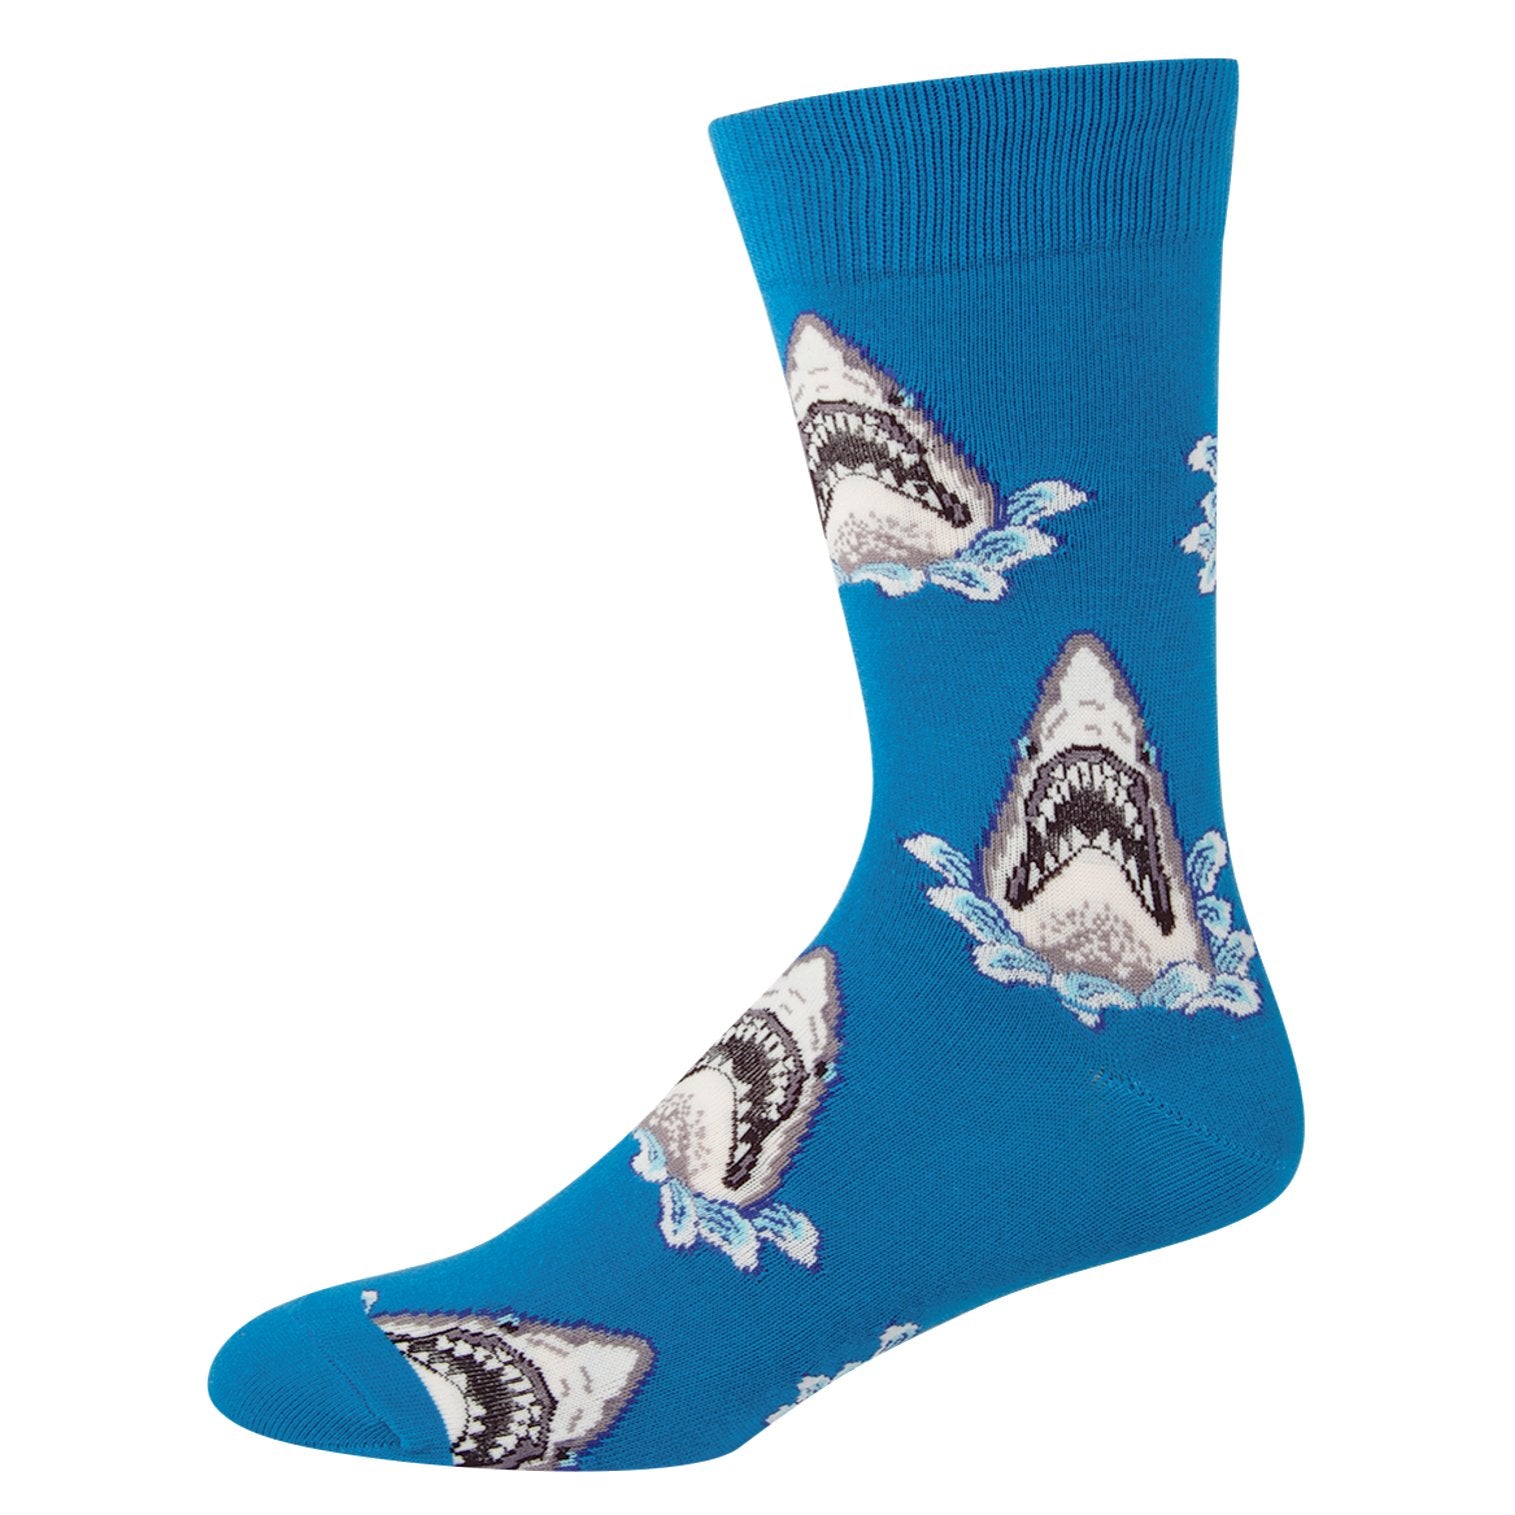 Extra large socks for men feature sharks in a sea of blue.